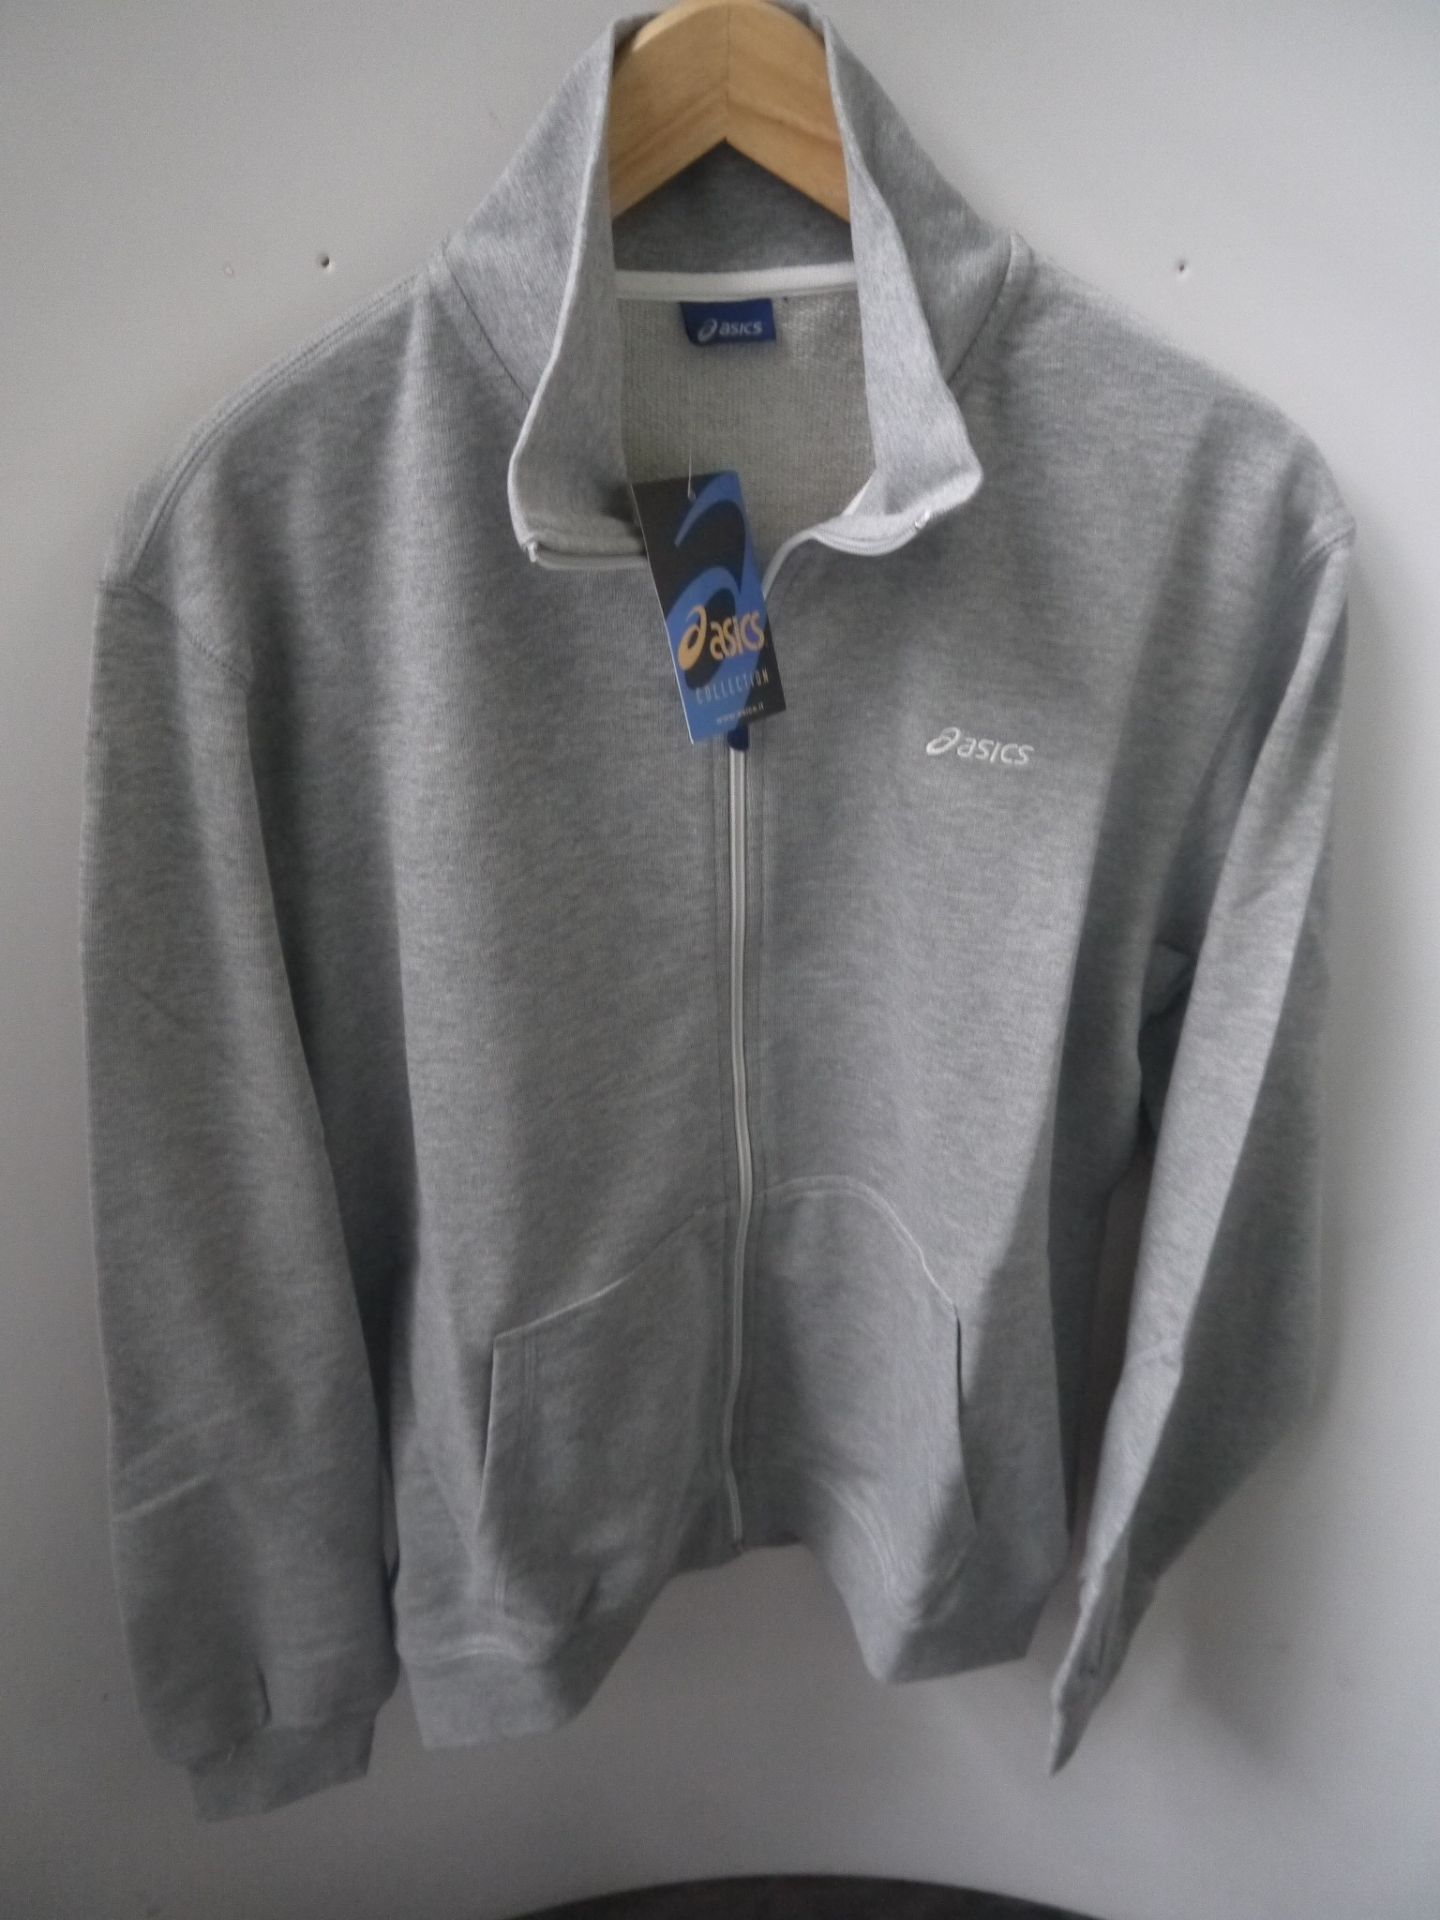 Asics Grey Full Zip top, new with tag on, RRP £40 size Large